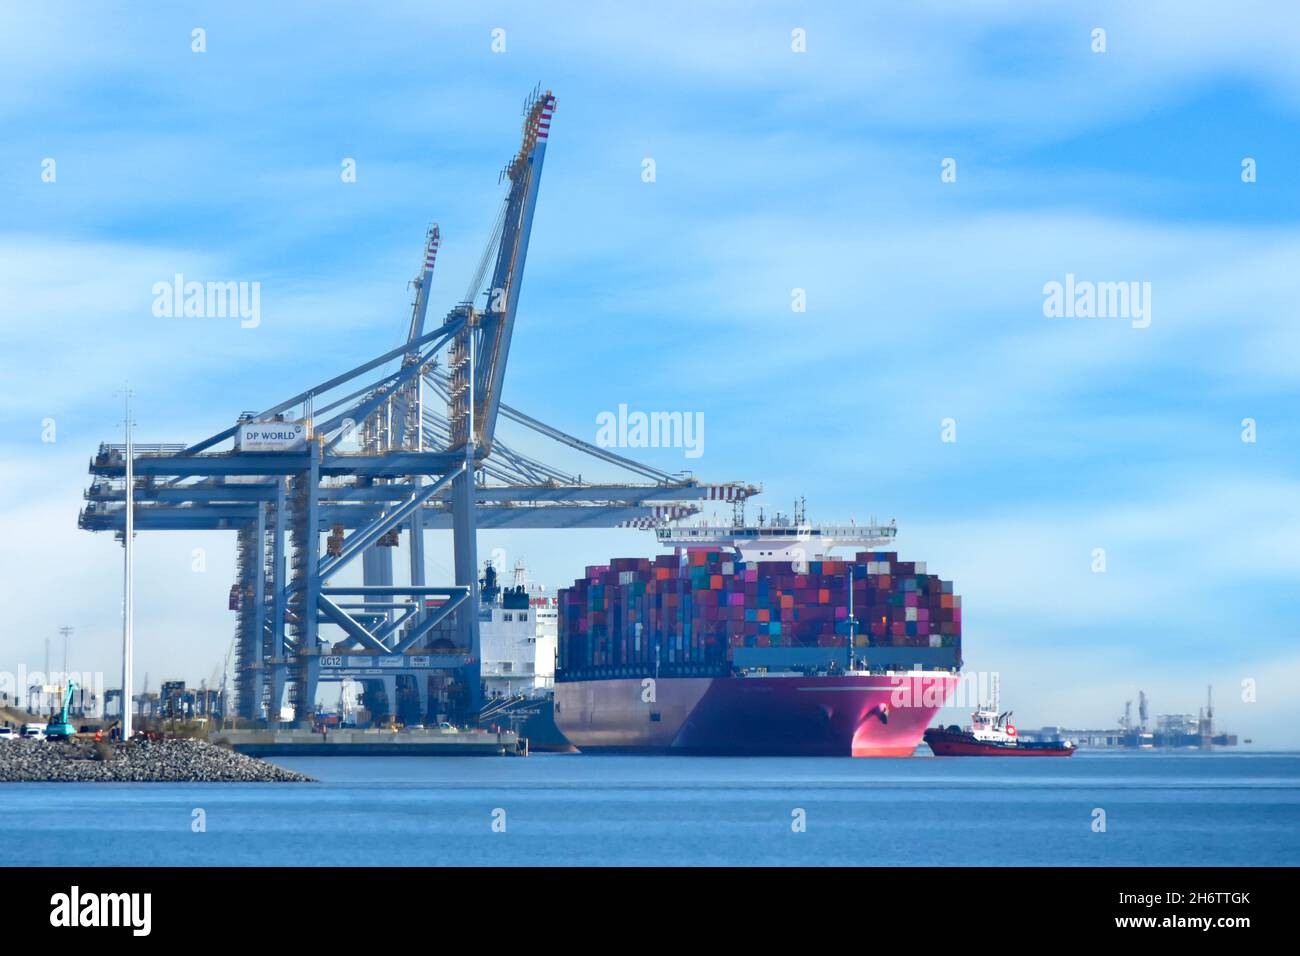 Tugboat pushing big container ship & full load of shipping containers to birth below giant tall cranes at London Gateway Thames estuary port Essex UK Stock Photo